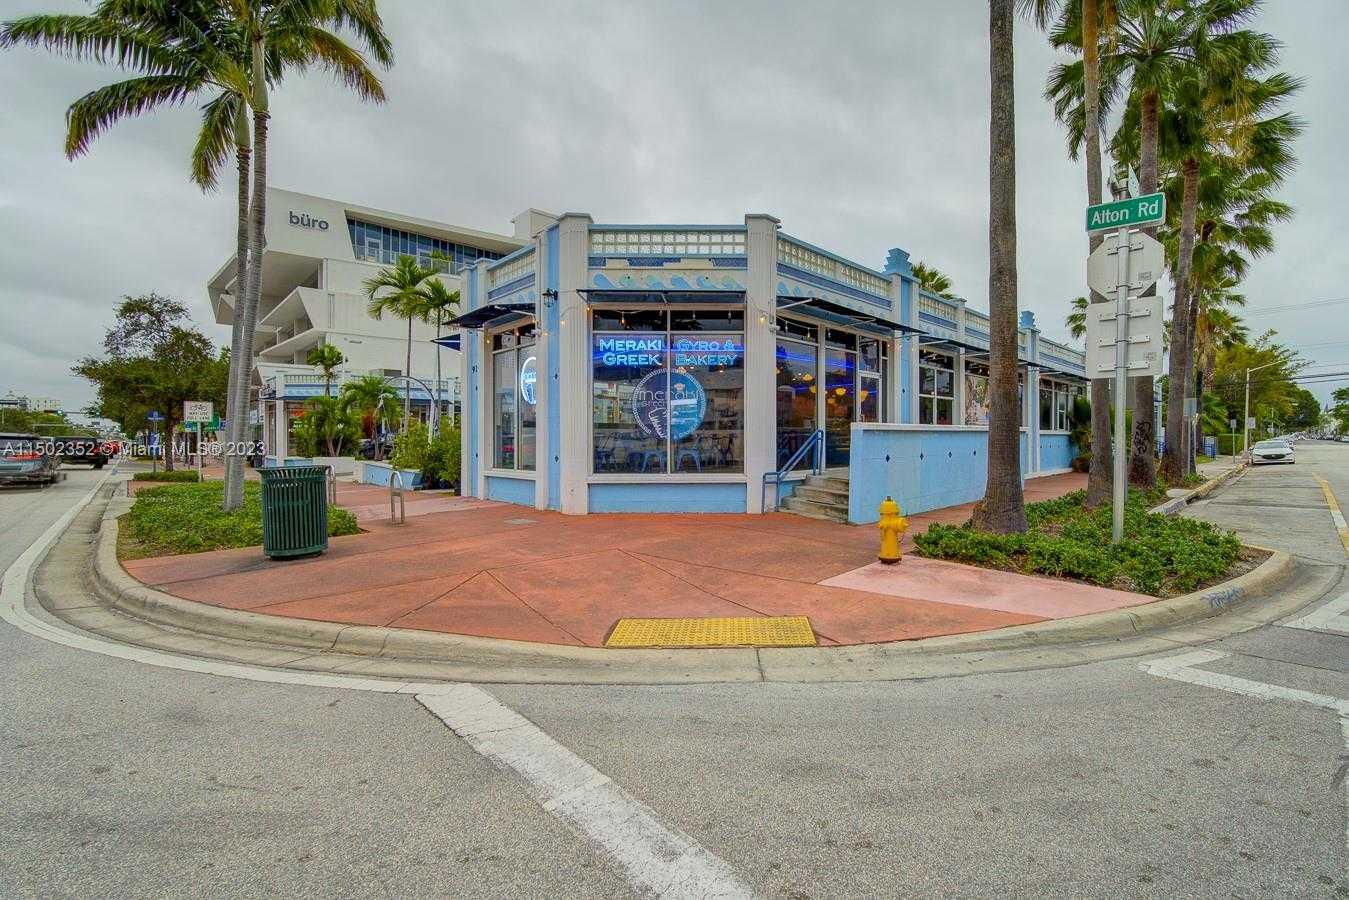 Free-Standing Restaurant For Sale in Miami Beach, Miami Beach, Business,  for sale, Sandra Benkahla, The 305 Agency